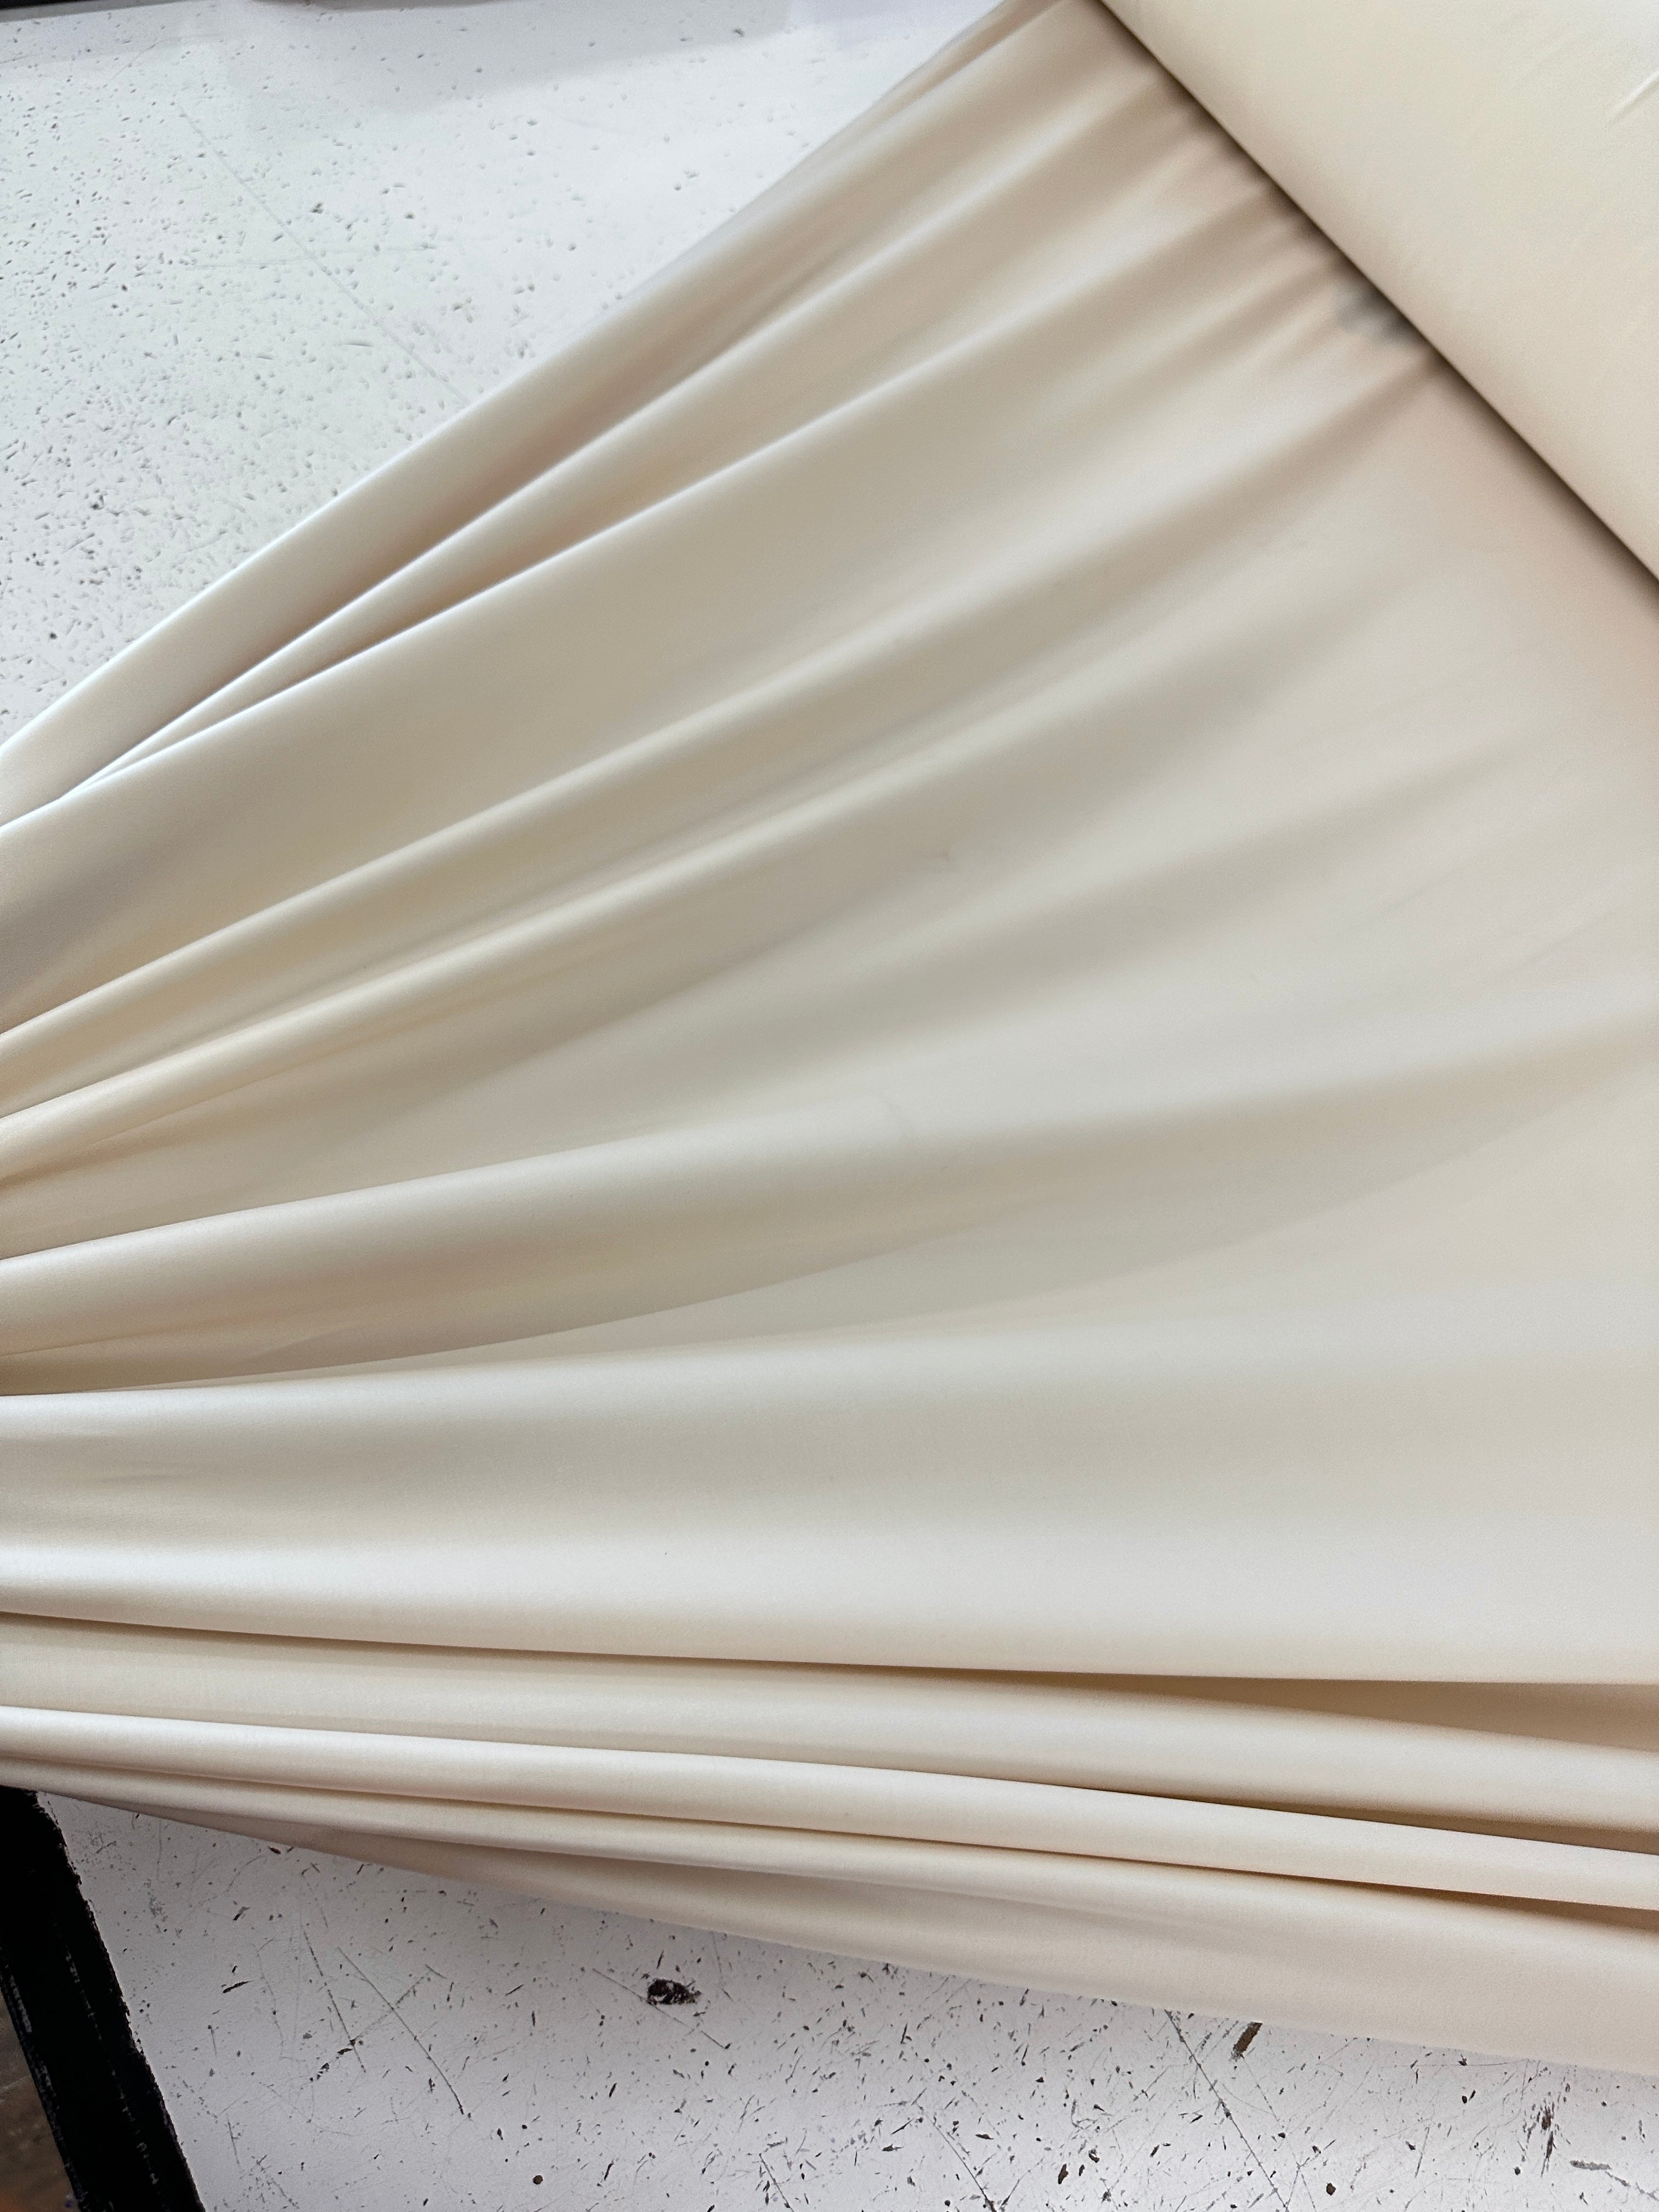 beige all way Stretch Faux Leather, cream color all way stretch leather, shiny faux leather, light brown all way stretch faux leather for woman, faux leather for costumes, faux leather for home decor, 2 way stretch faux leather, leather for blazers, cheap leather, discounted leather, leather on sale